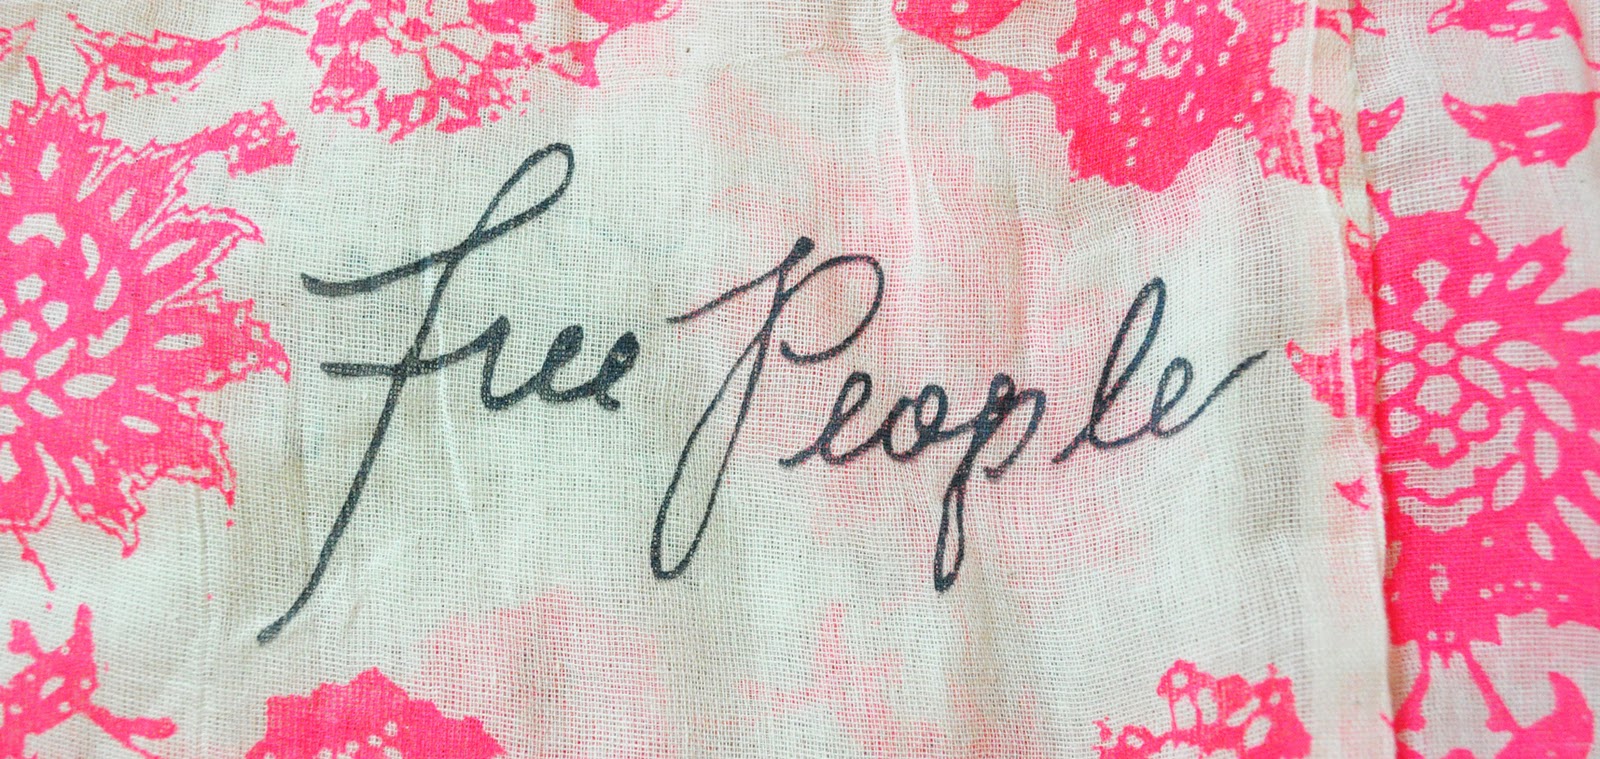 Free People's Effective Use of Social Media – Marketing on the